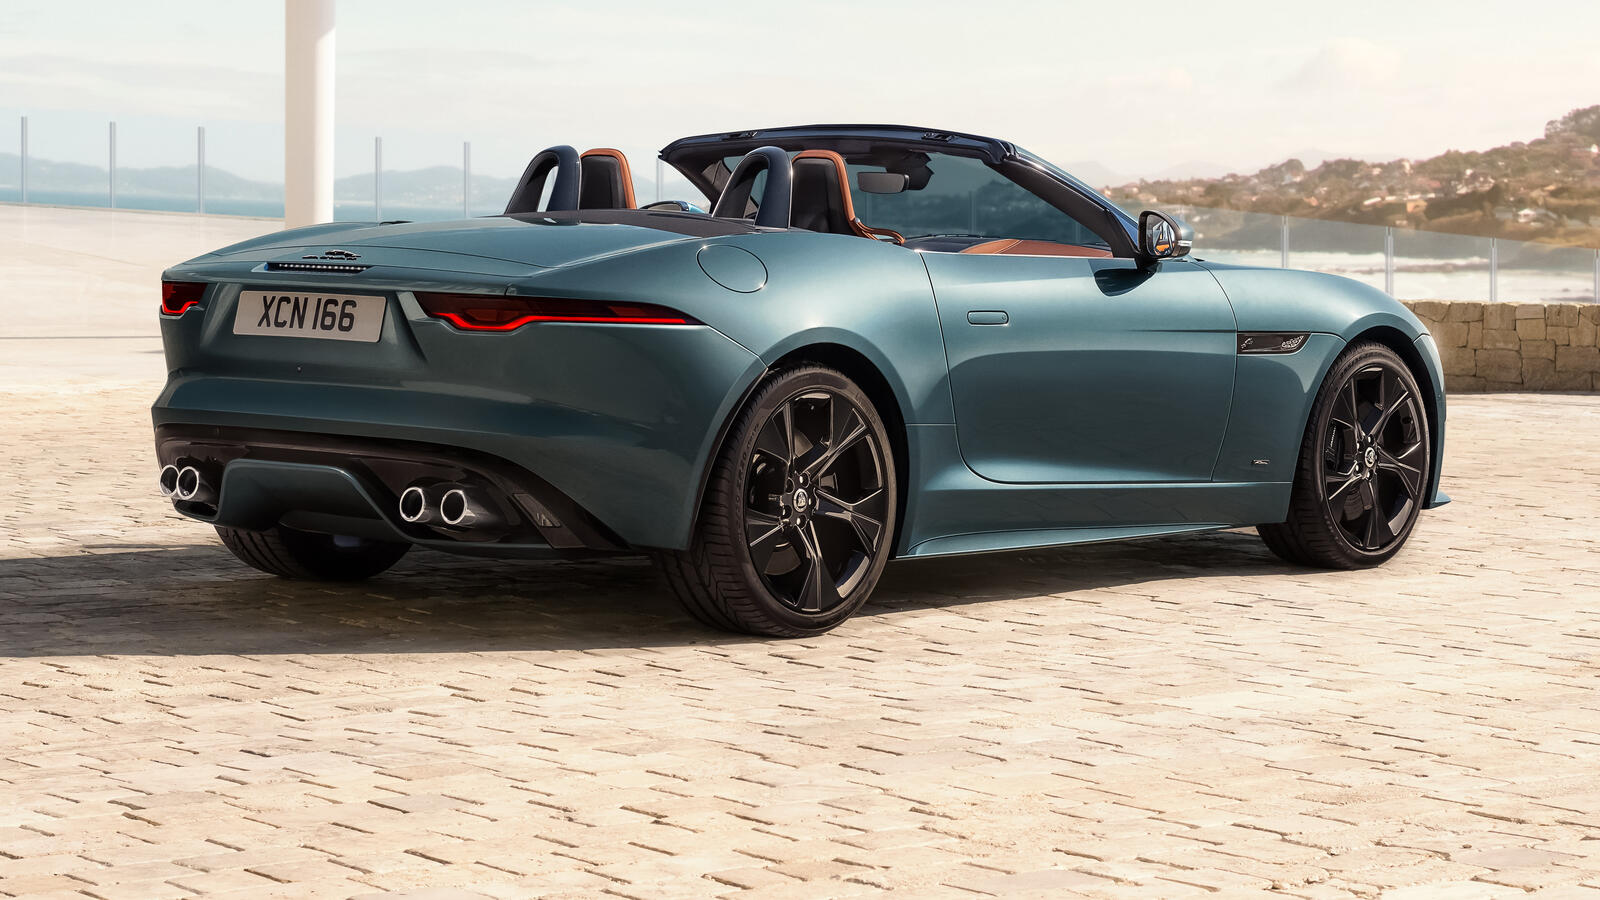 Free photo Sporty Jaguar F-type 75 R Convertible parked on a paving stone